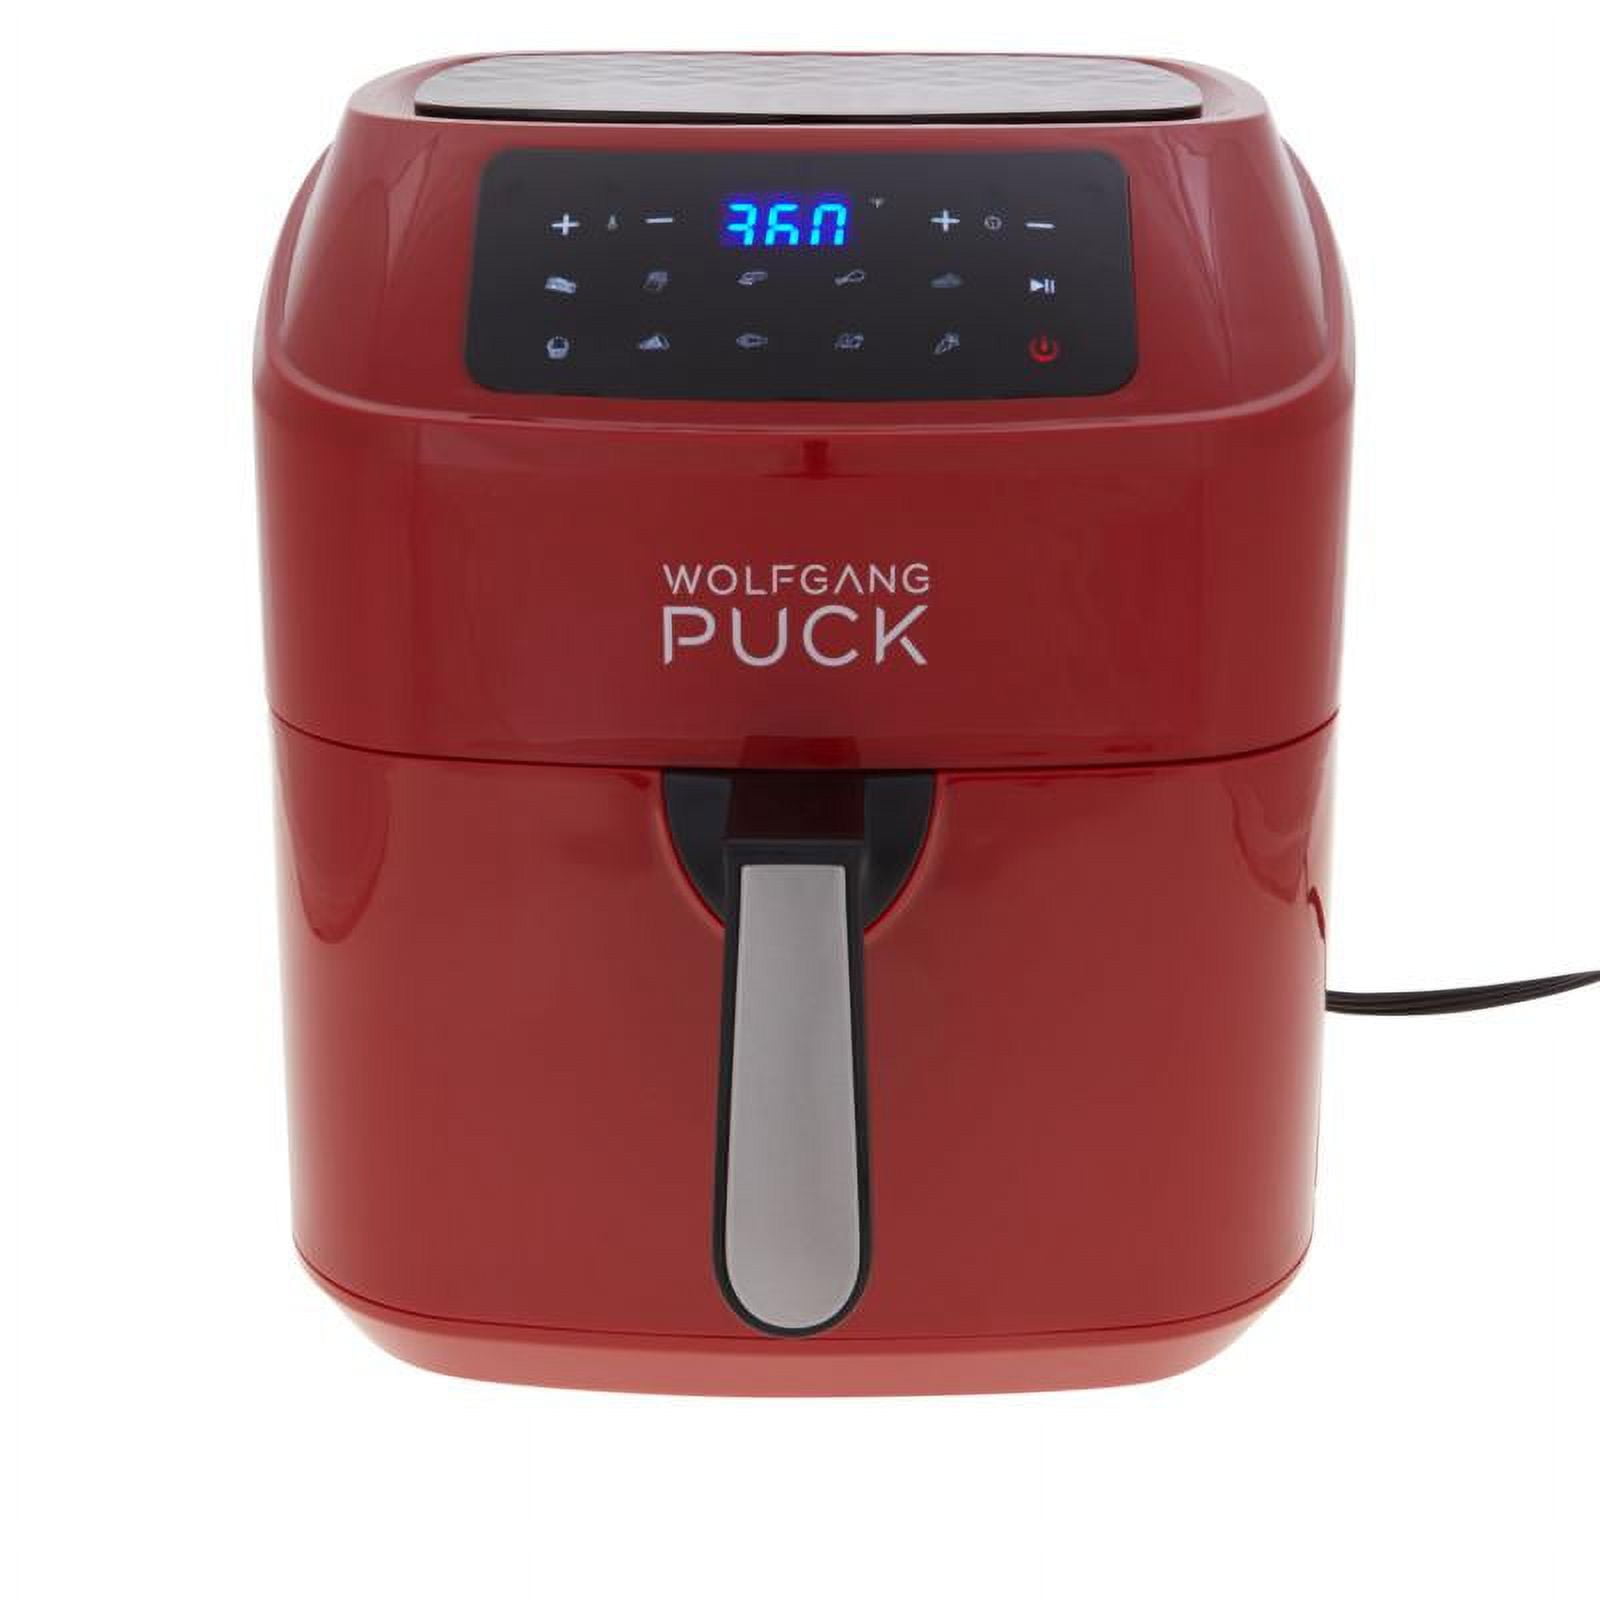 Wolfgang Puck 9.7 qt. Stainless Steel Air Fryer with Large Single Basket Design, Simple Dial Controls, Nonstick Interior